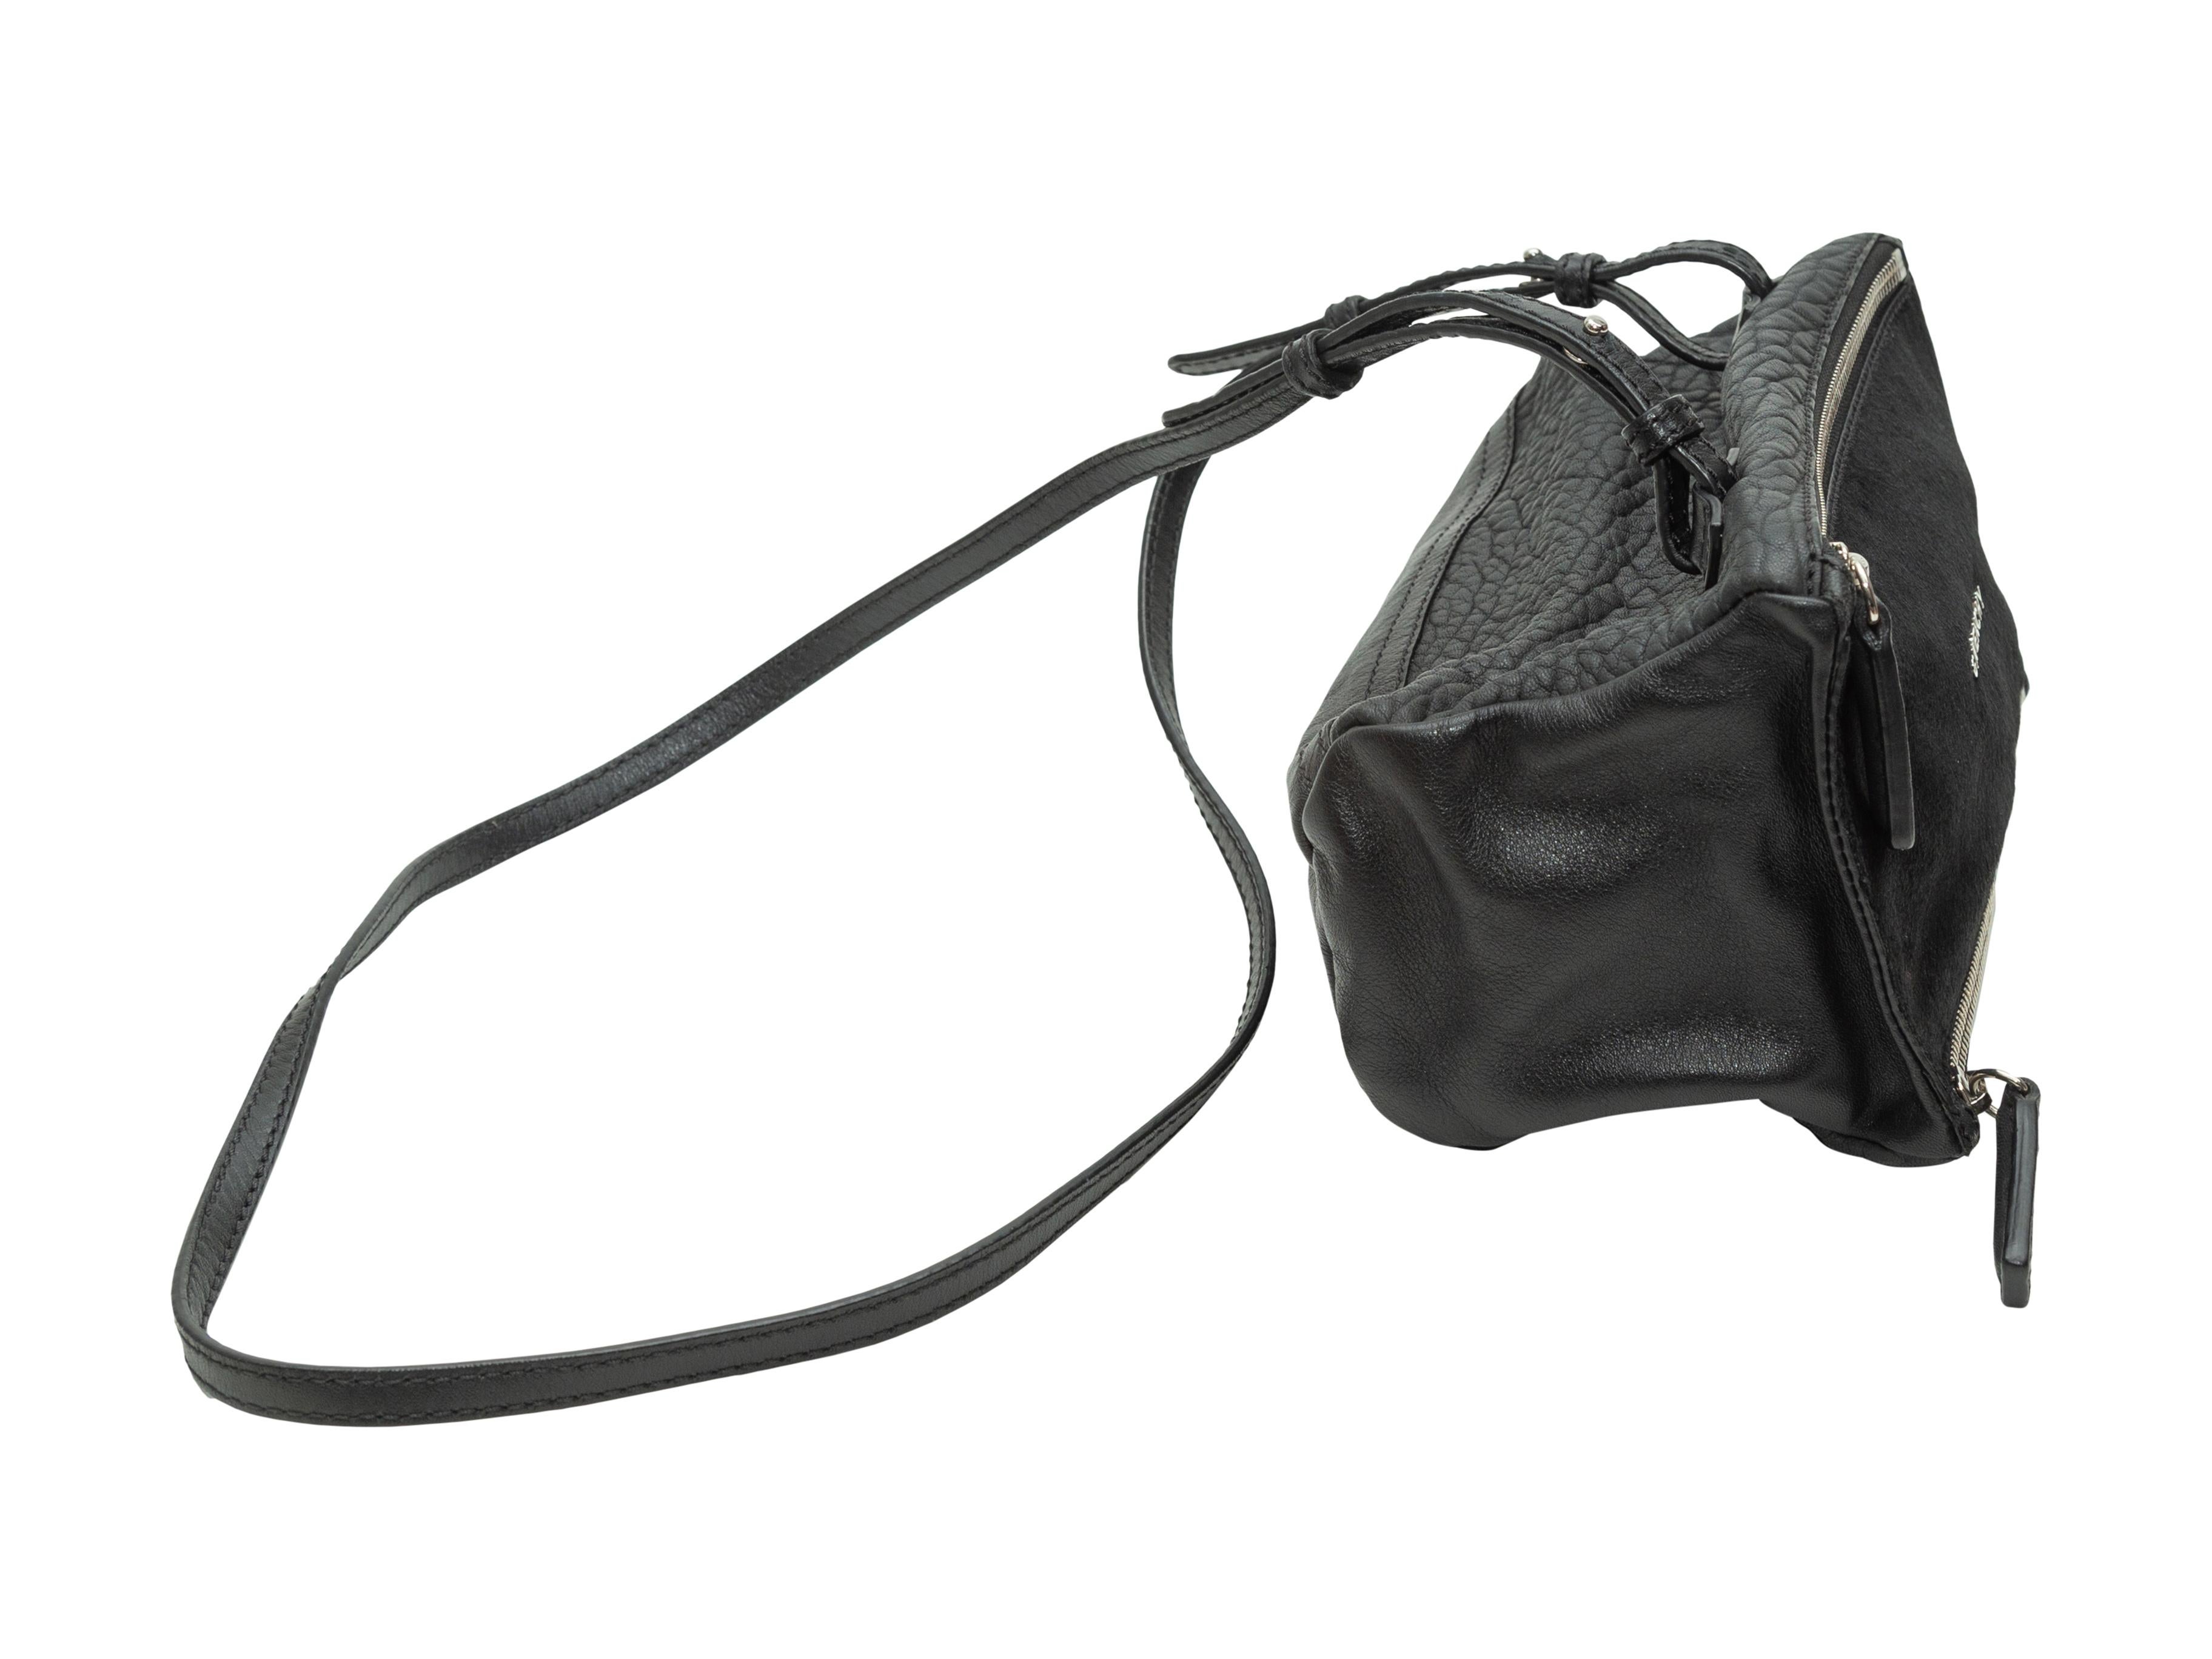 Product Details: Black ponyhair and leather 'Pandora' crossbody bag by Givenchy. Silver-tone hardware. Interior zip pocket. Adjustable shoulder strap. Dual exterior zip closures. 9.5